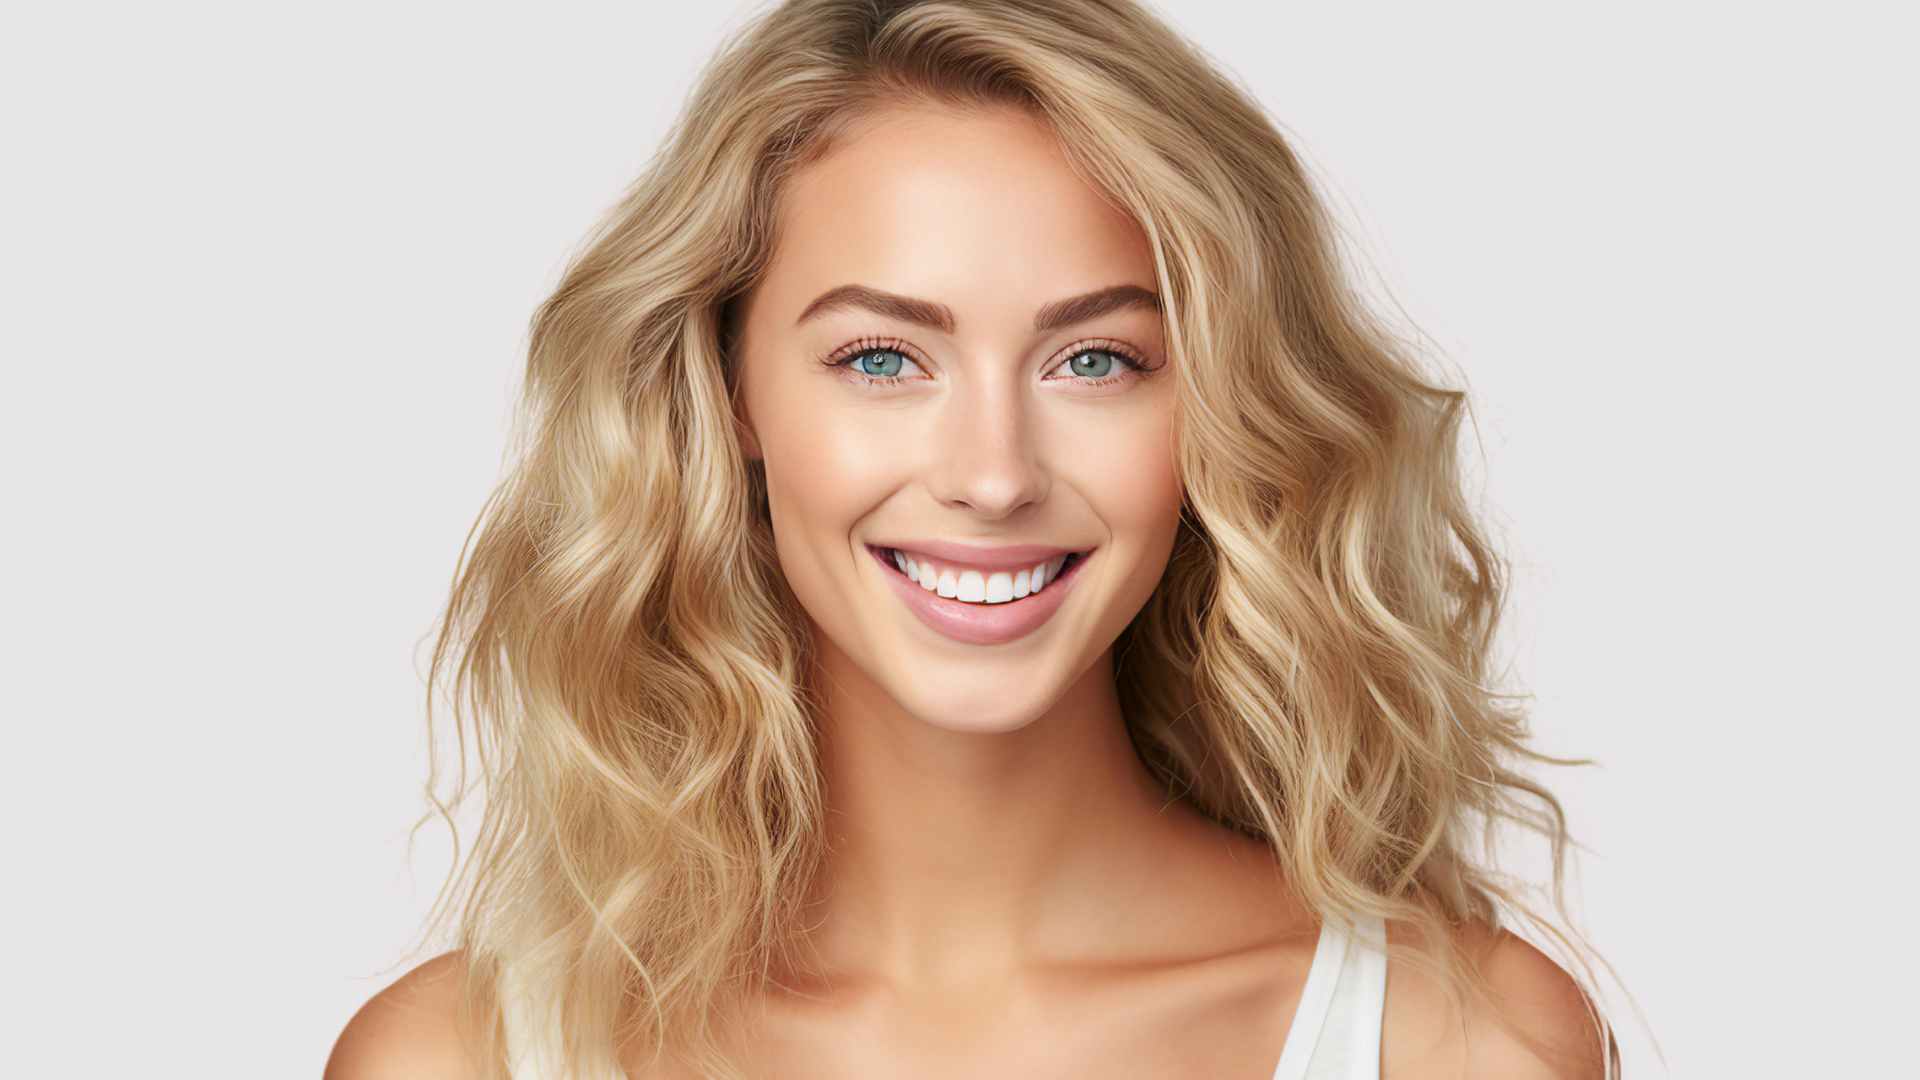 Female with a wavy blonde hair and no split ends